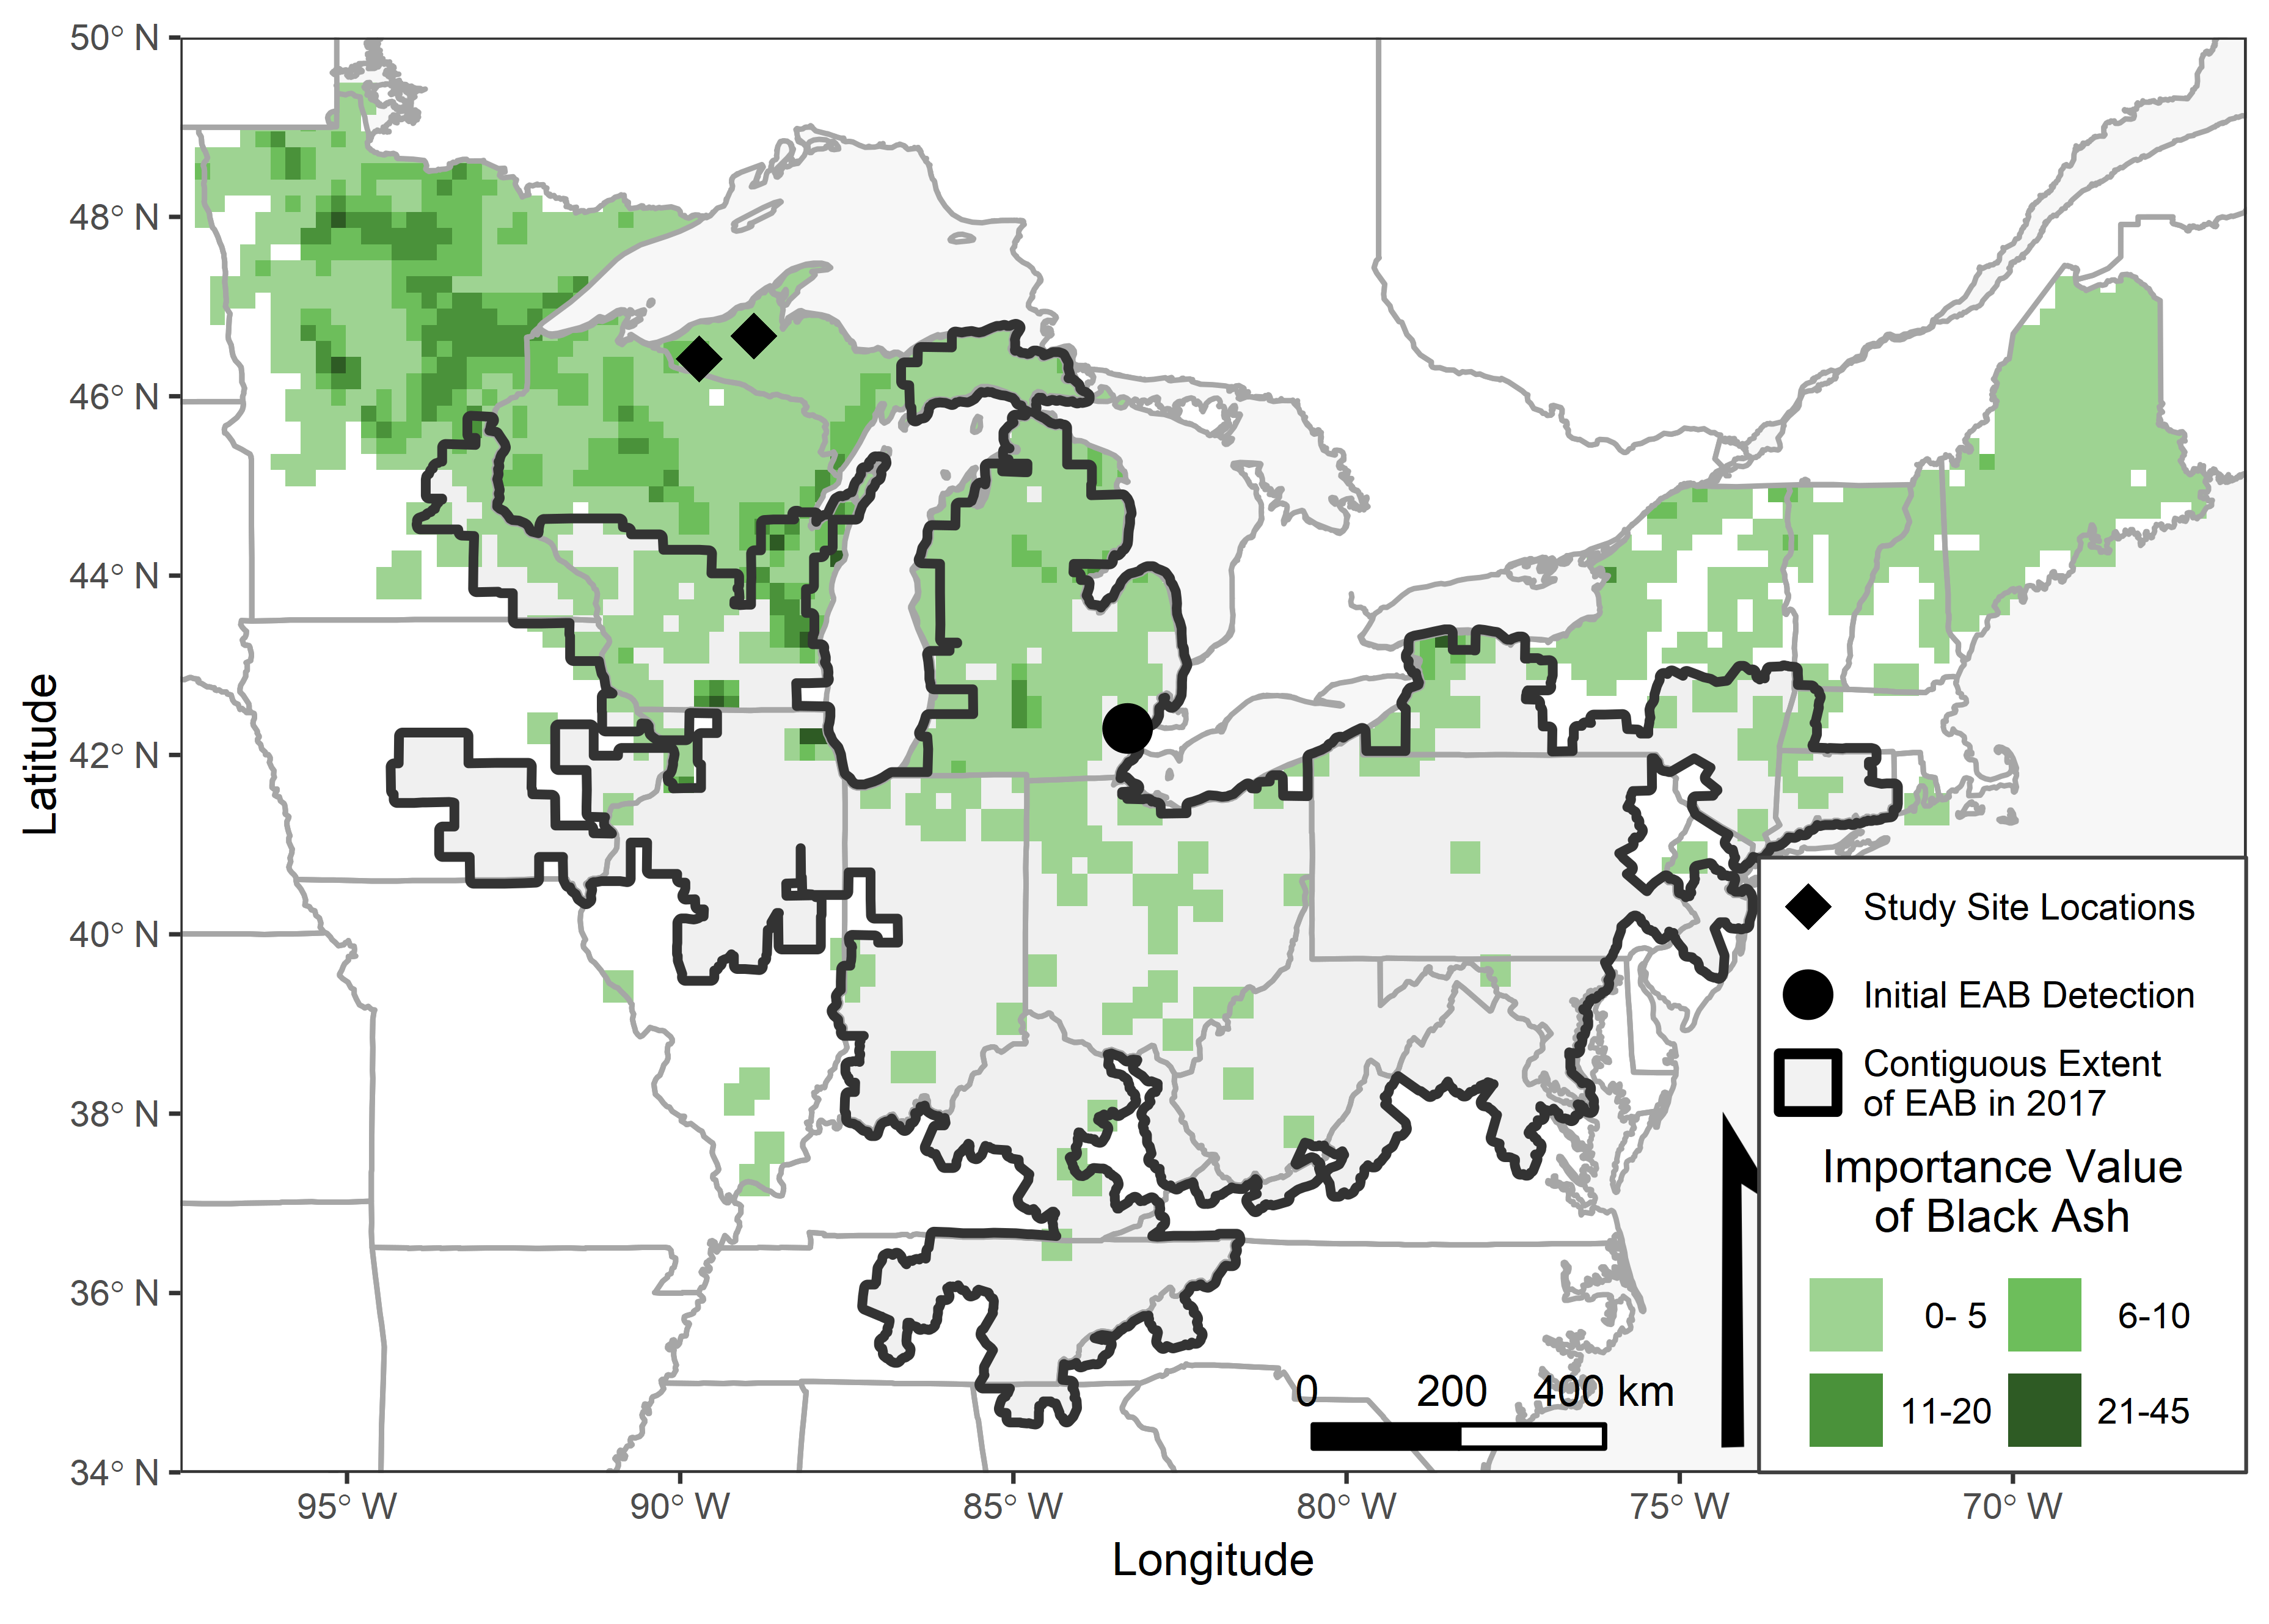 Contiguous extent of Emerald Ash Borer and Importance Value of black ash throughout its range